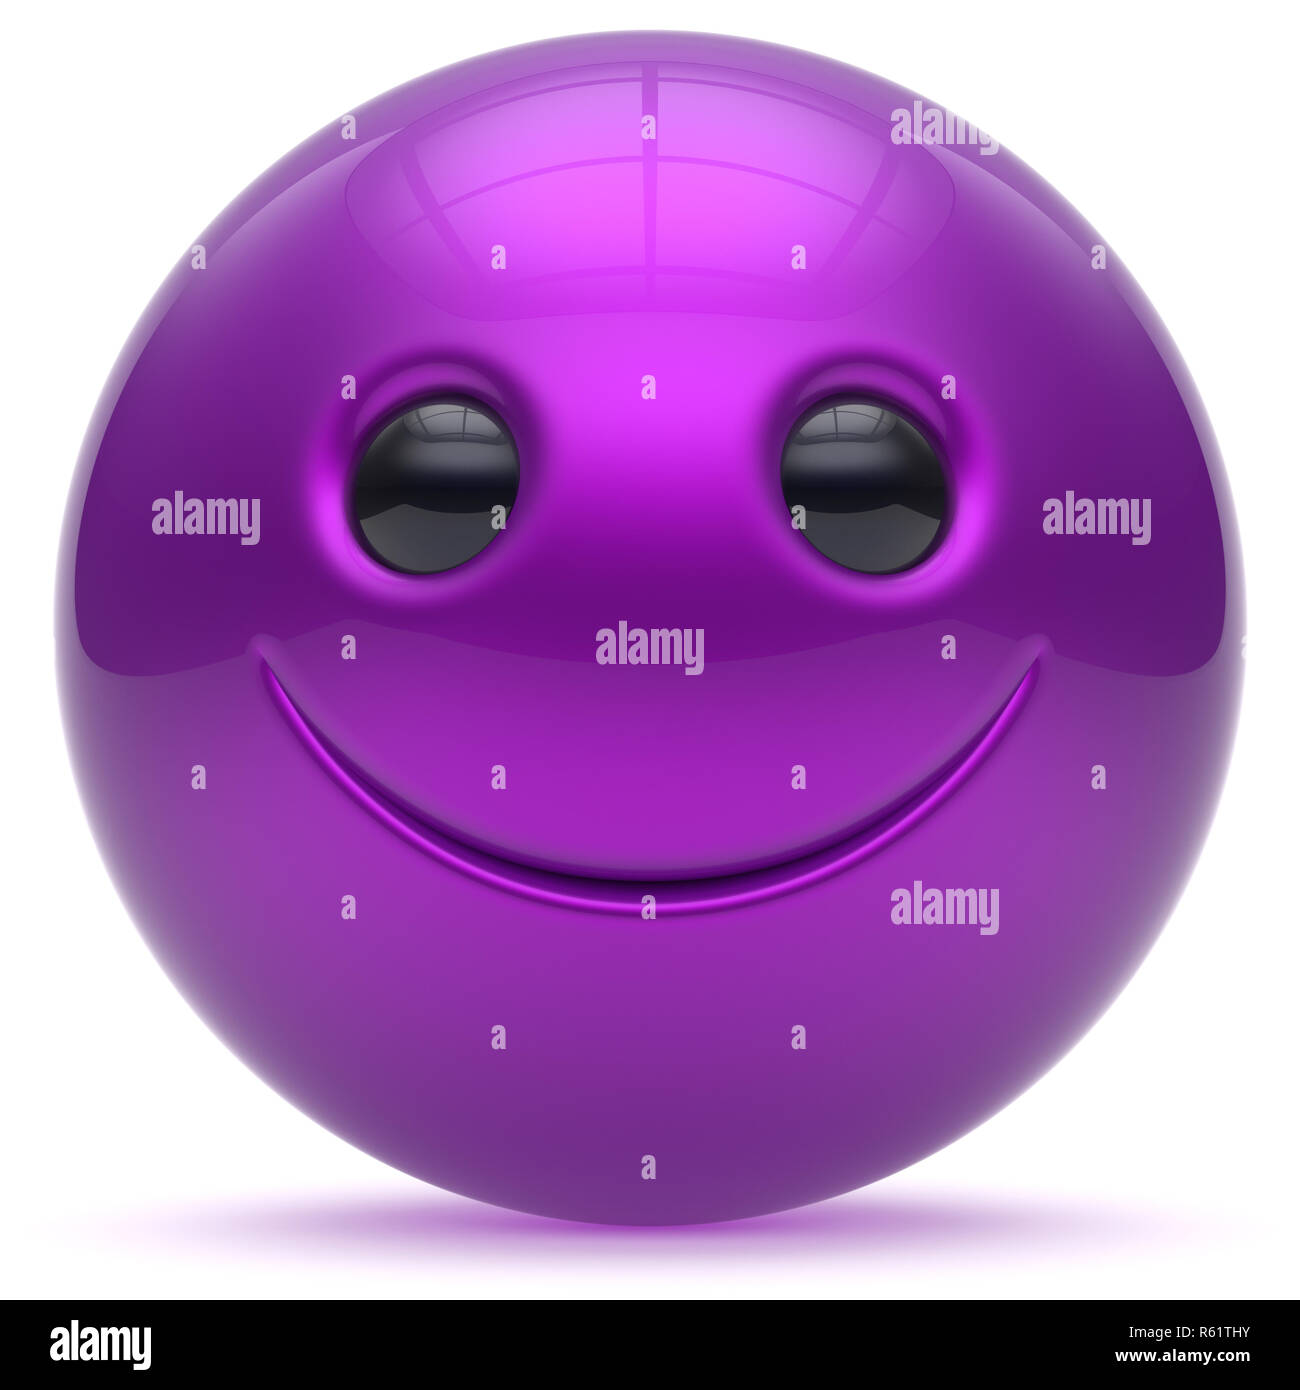 Smile face head ball purple cheerful sphere emoticon cartoon smiley happy decoration cute blue. Smiling funny joyful person laughing joy character toy Stock Photo